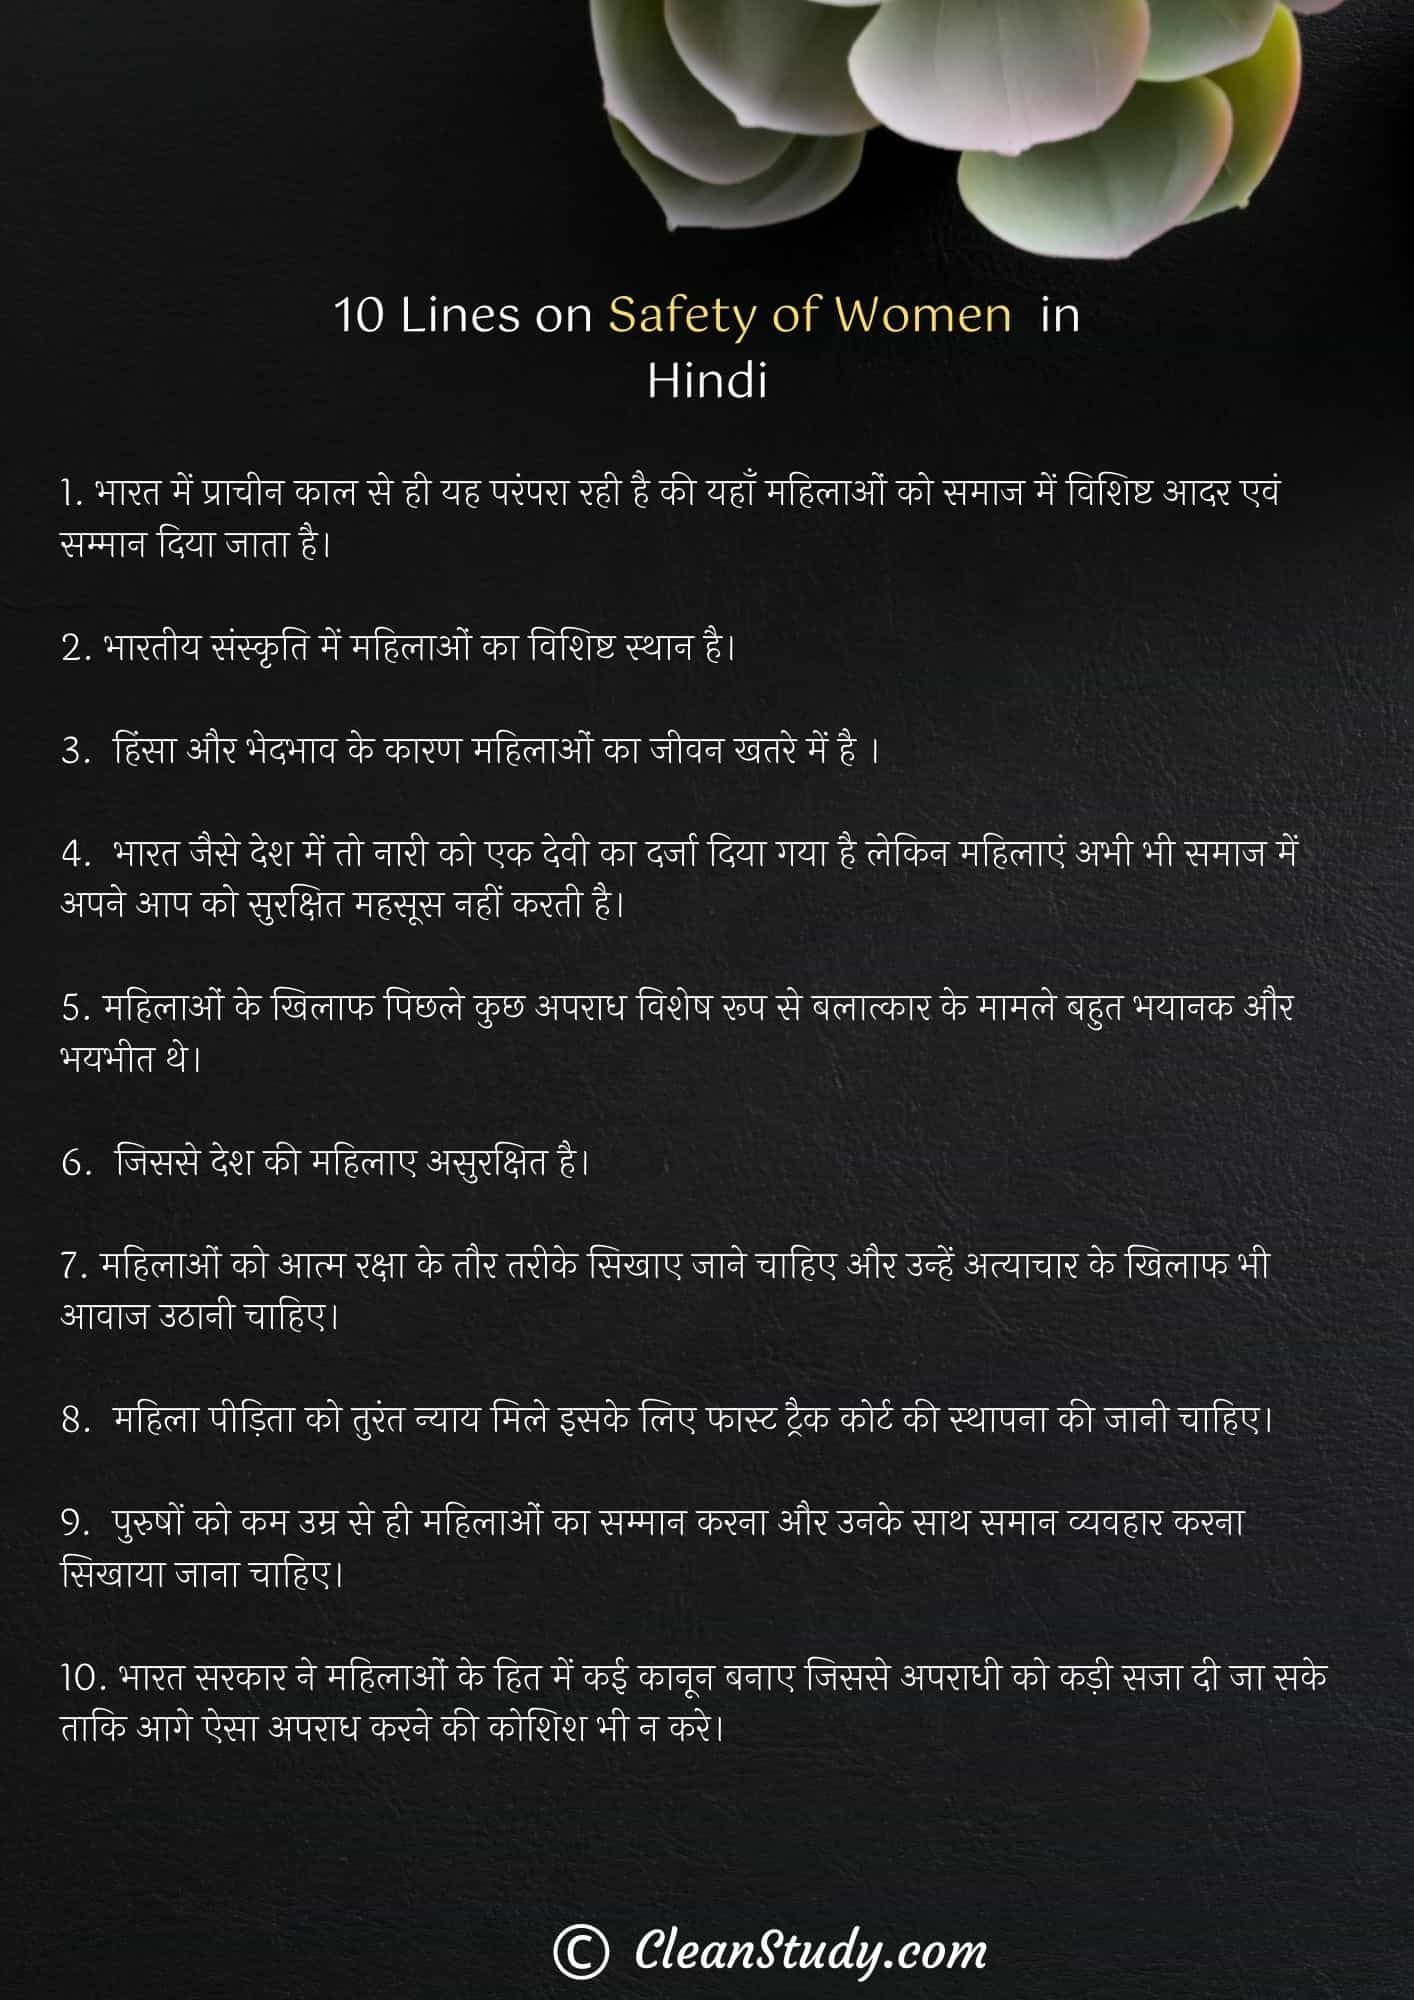 10 lines of safety of women in hindi